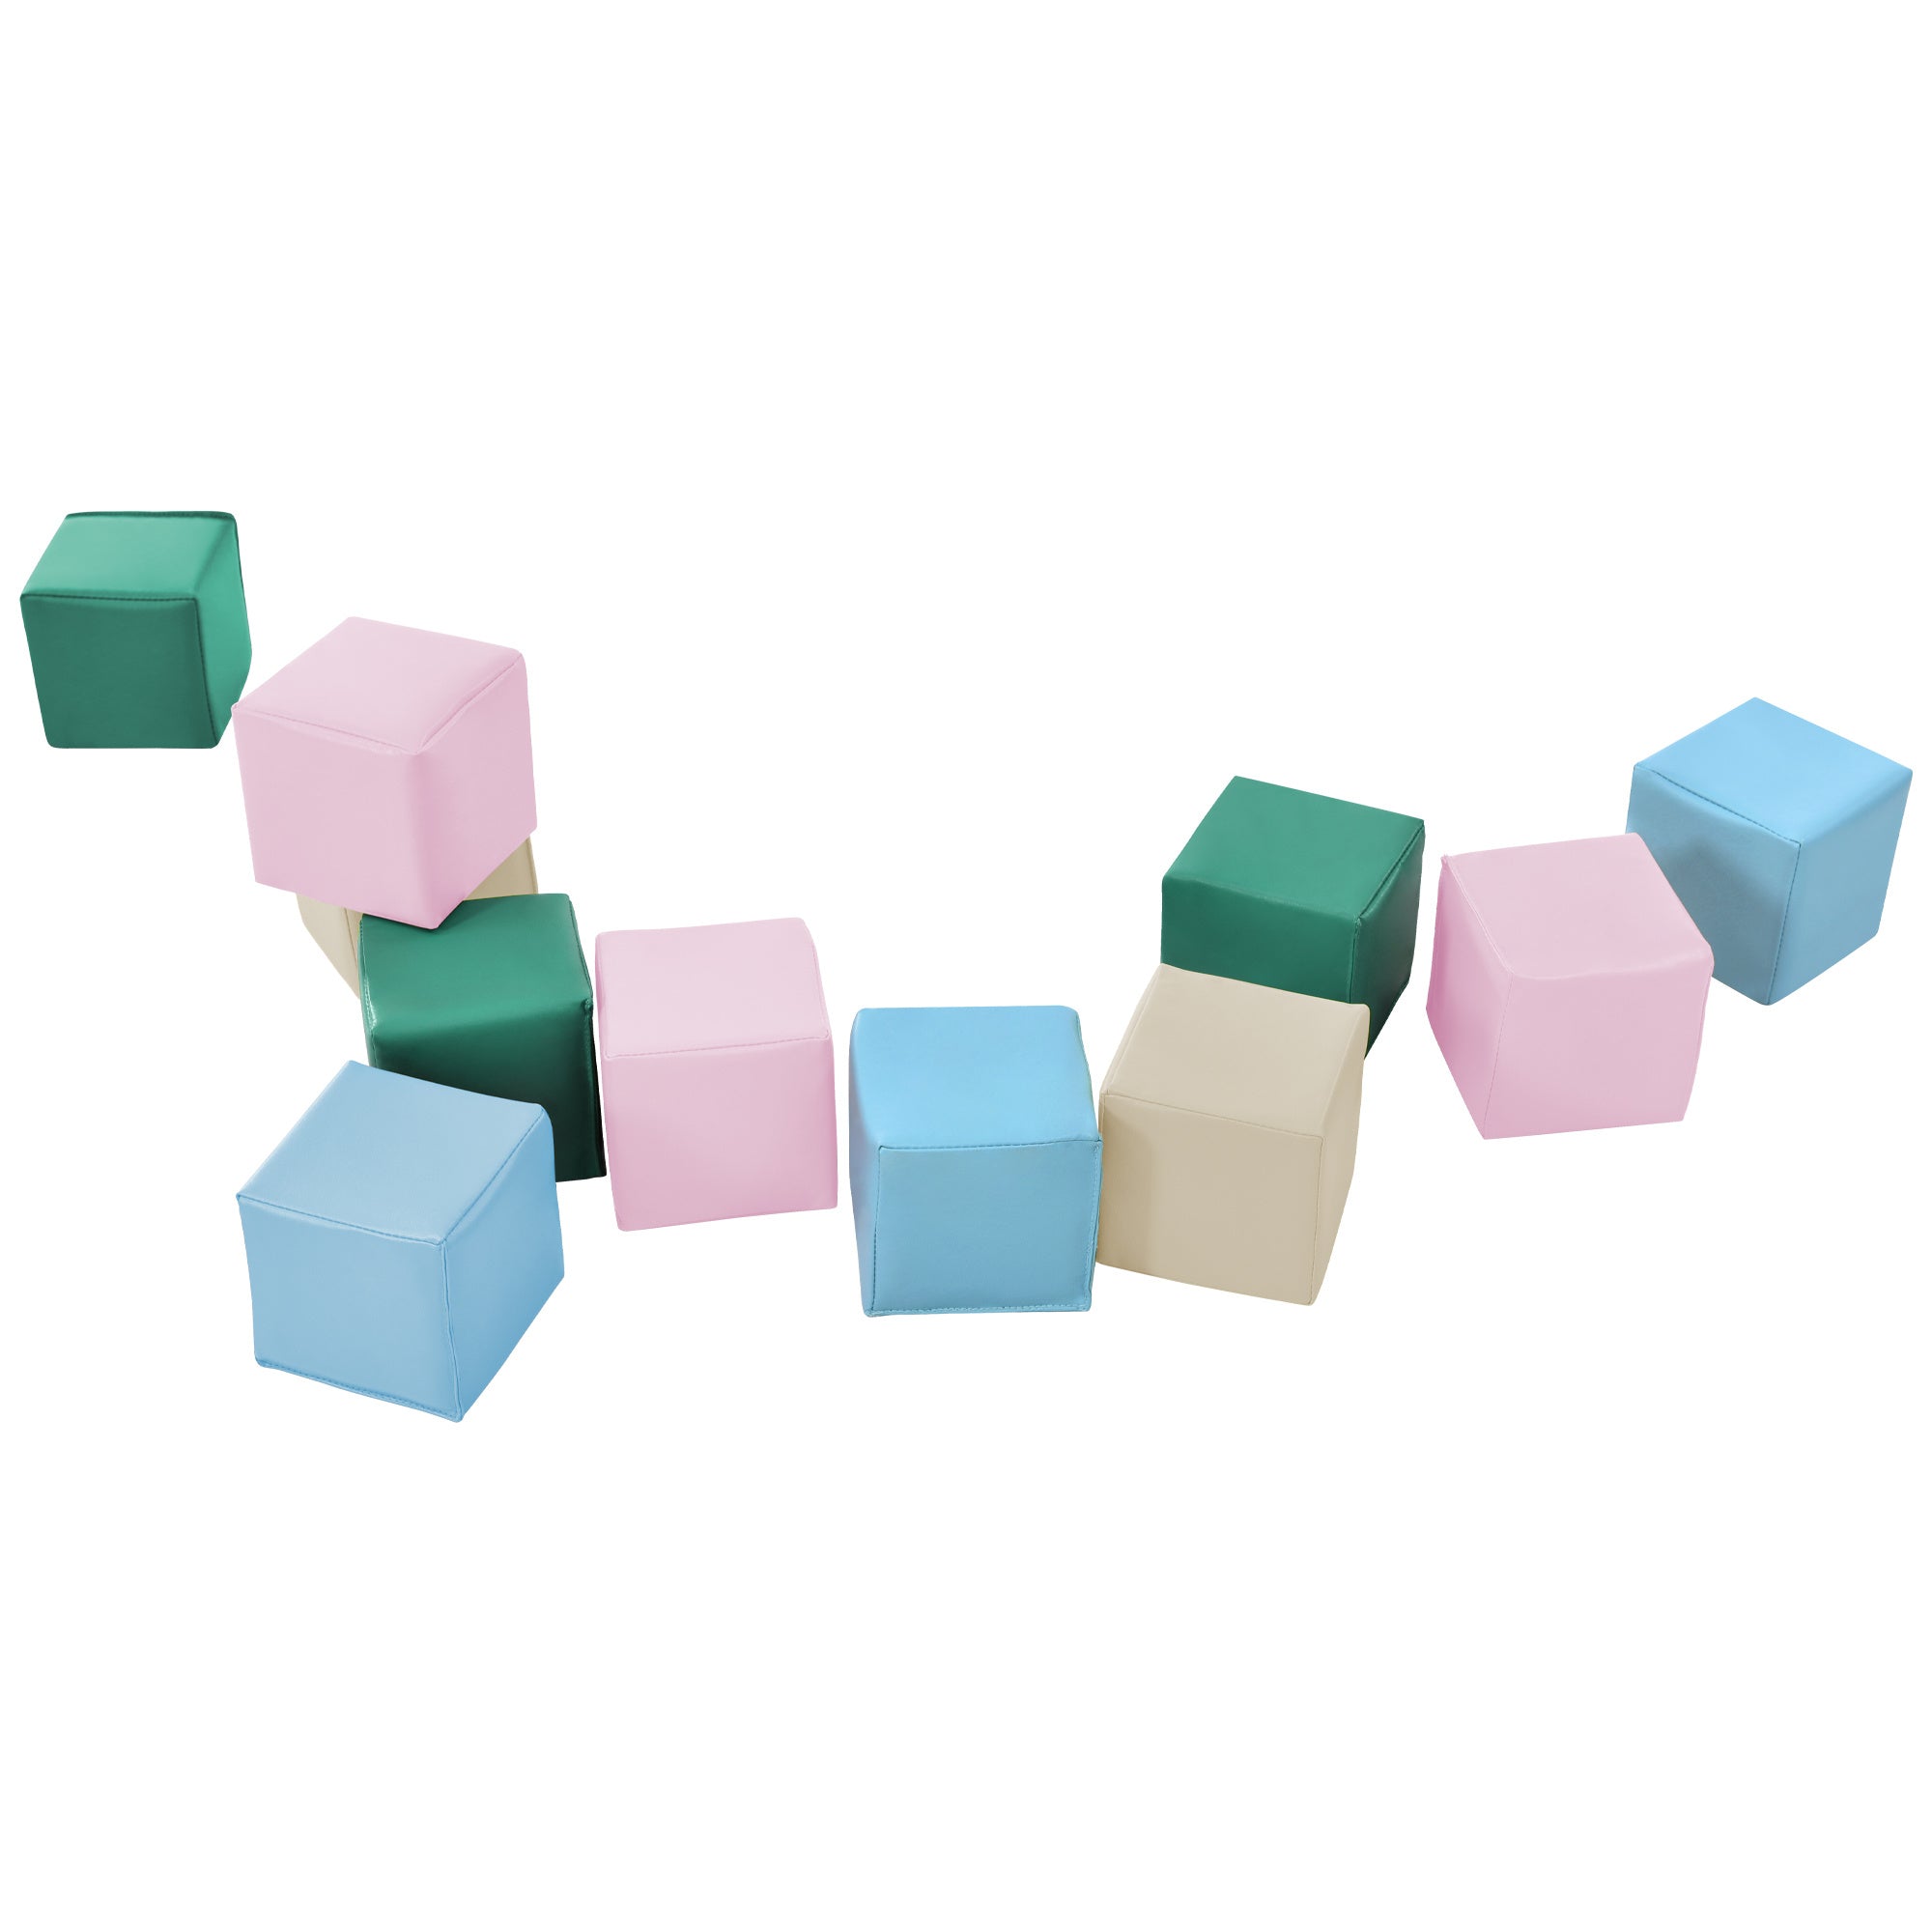 A vibrant collection of SoftZone Toddler Foam Block Playset in a living room.